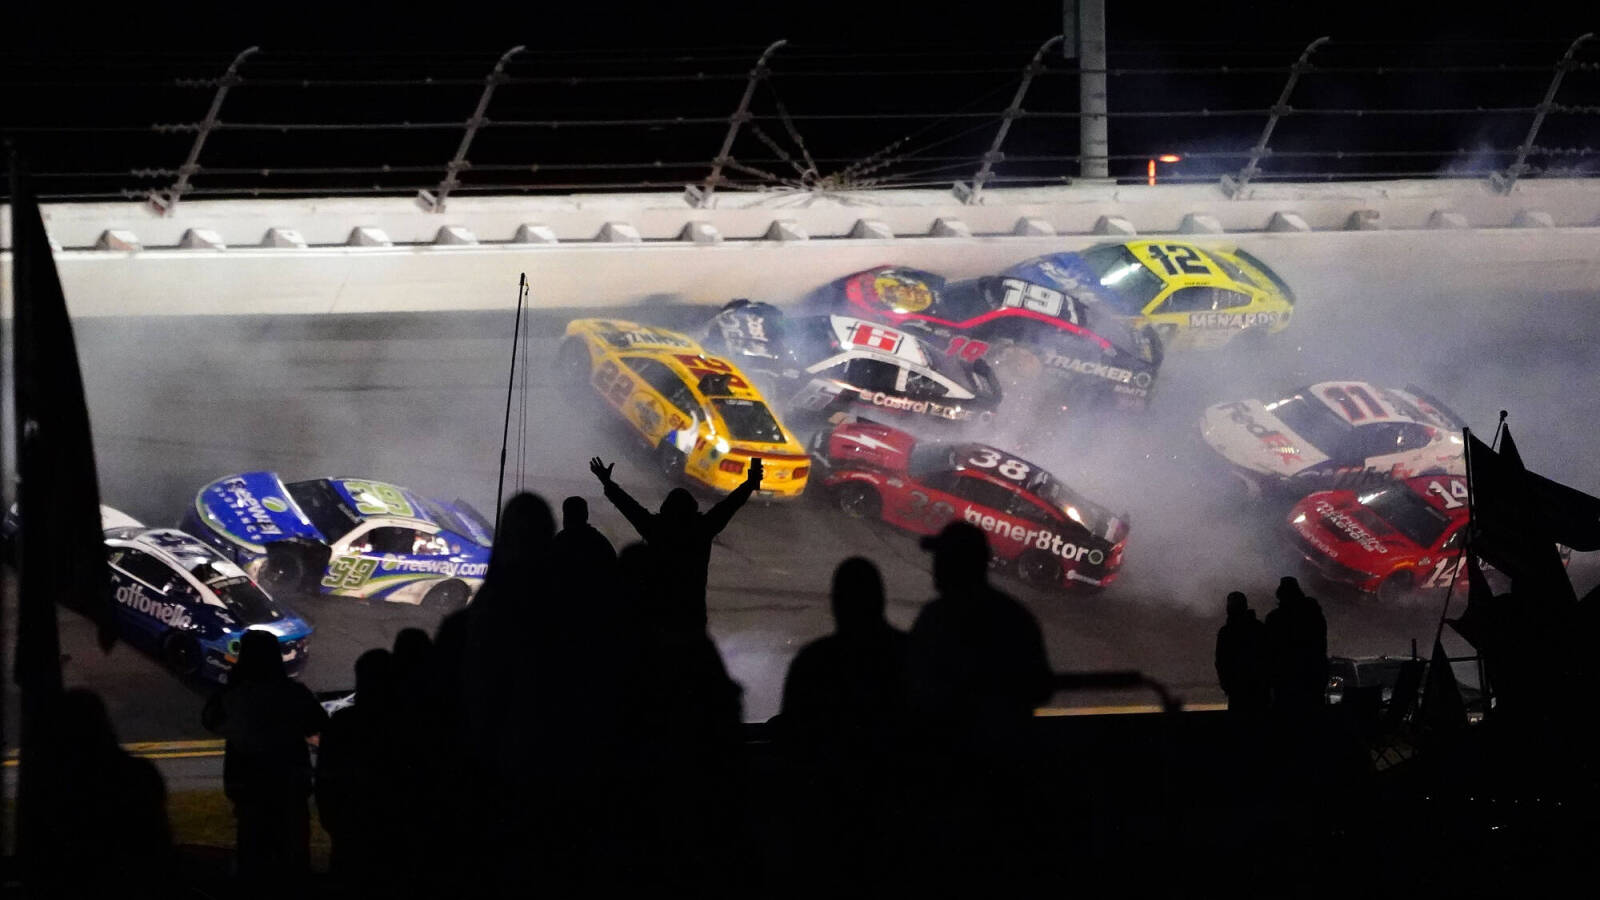 Joey Logano, Ryan Blaney knocked out of Daytona 500 as 'the big one' hits late